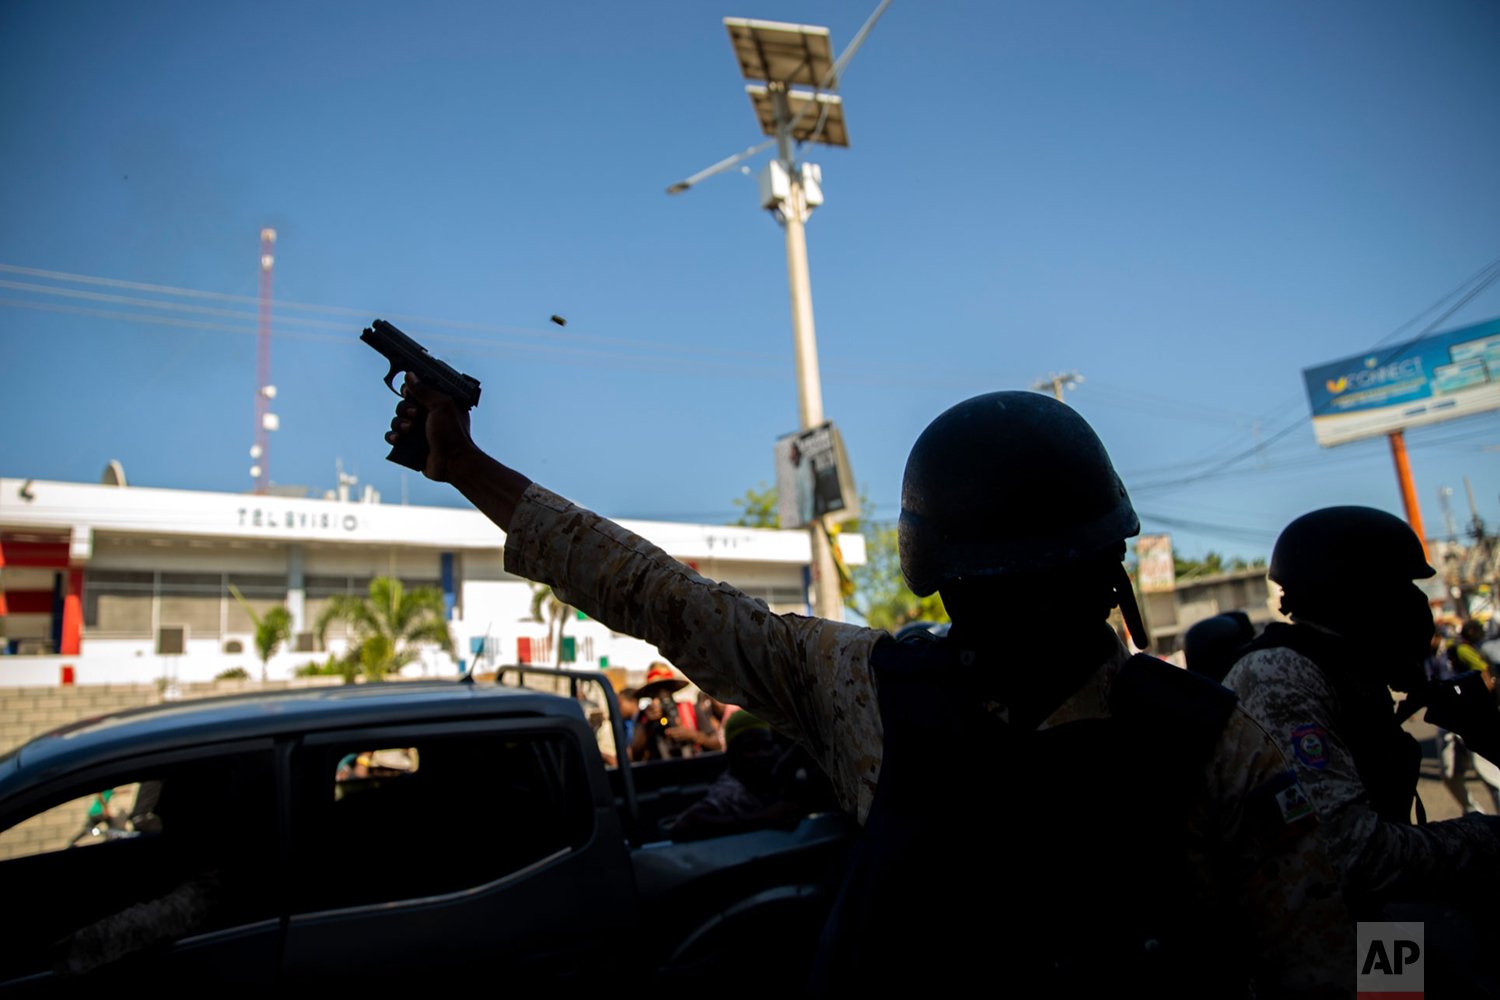  A police officer fires his weapon to disperse demonstrators during a protest to demand the resignation of Haitian President Jovenel Moise in Port-au-Prince, Haiti, Sunday, Feb. 7, 2021. ( AP Photo/Dieu Nalio Chery) 